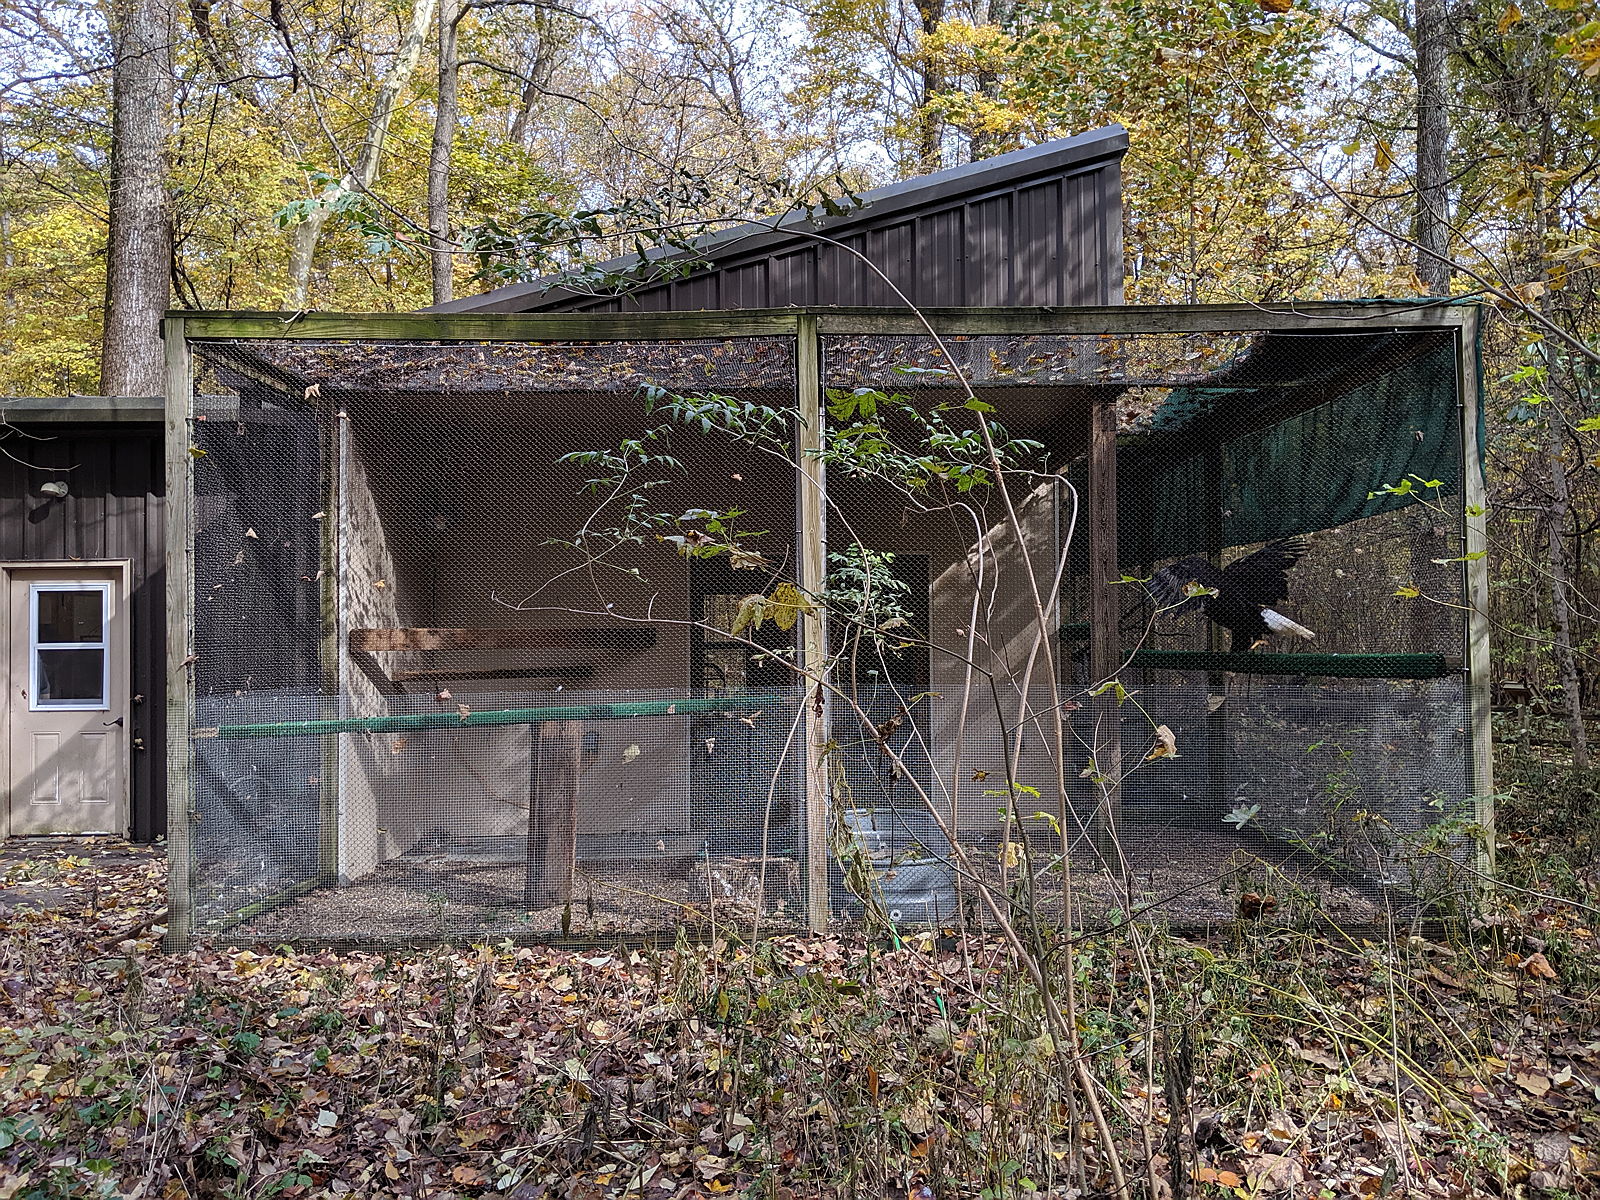 An animal housing complex within a forest